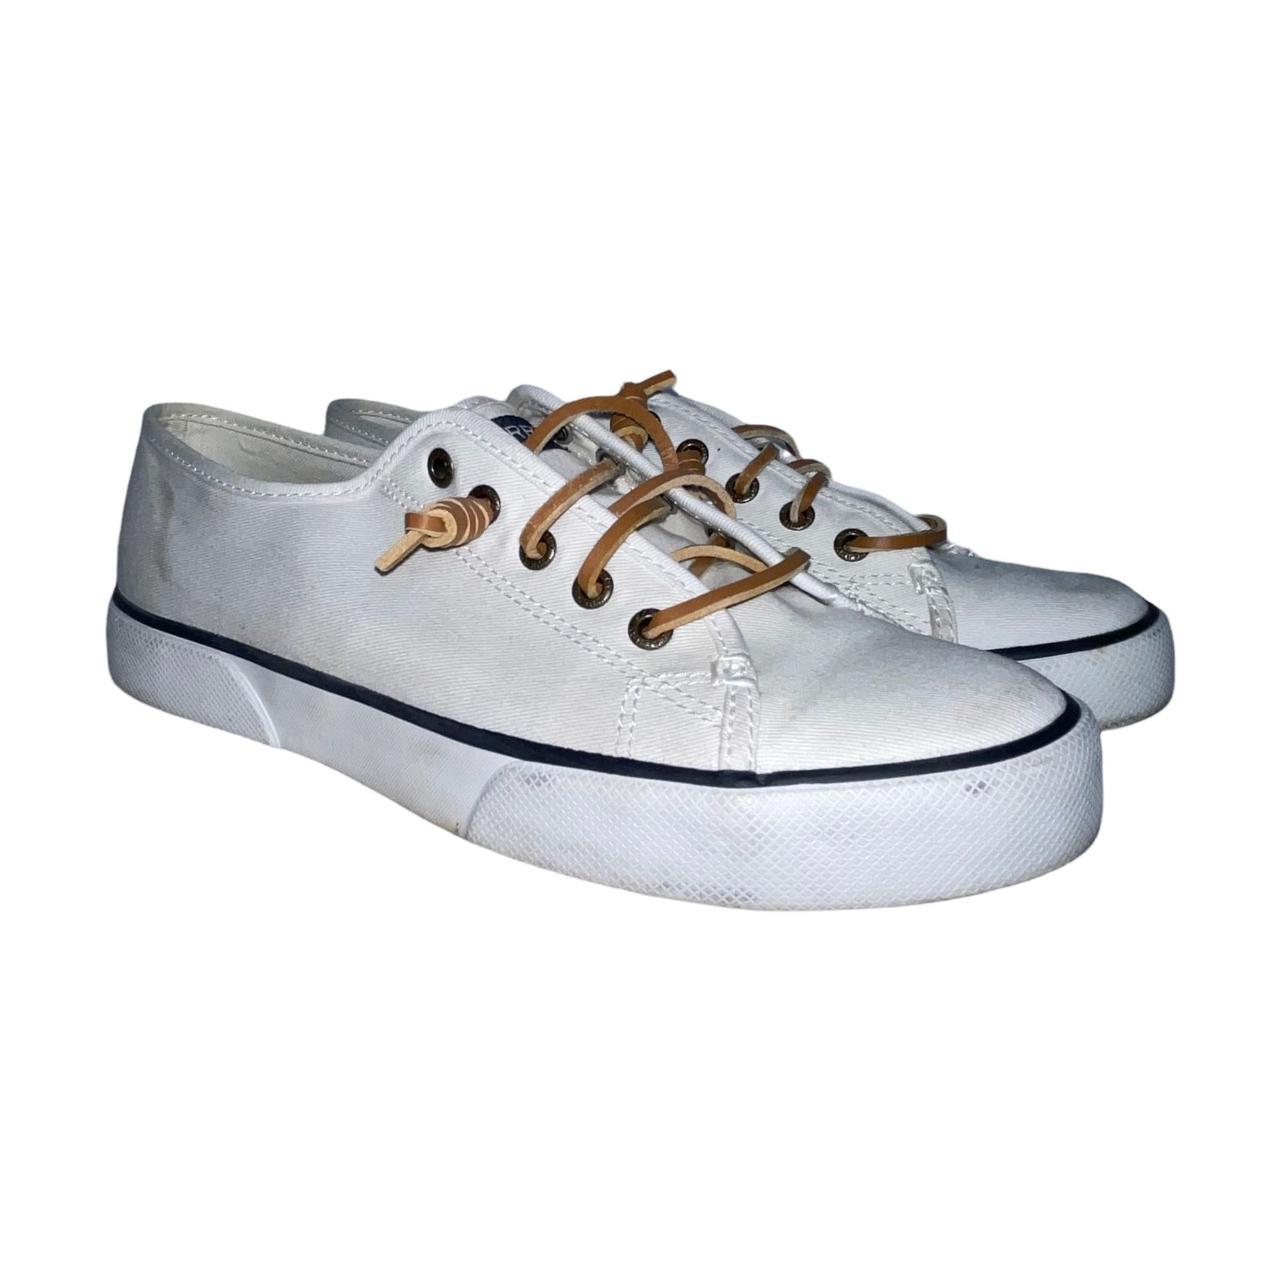 Women's White and Blue Loafers